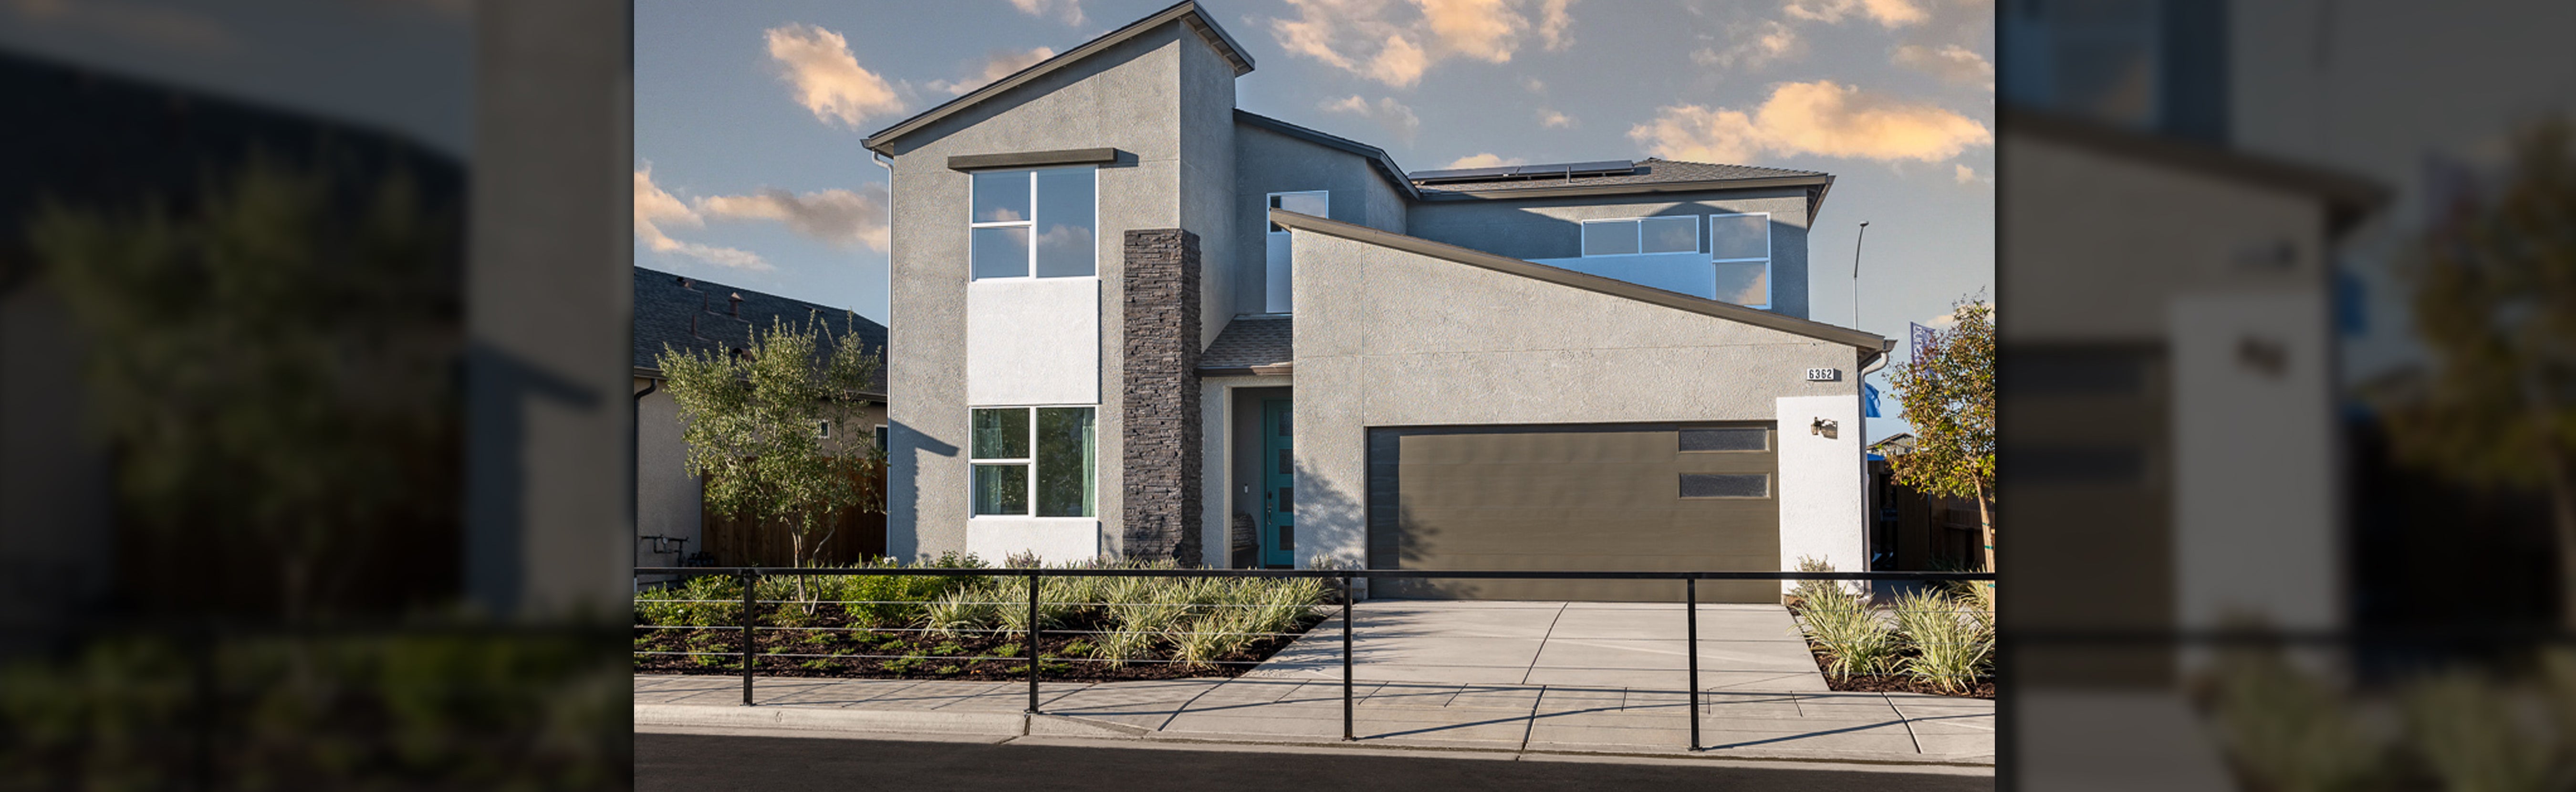 Join Us To Celebrate Our De Young Summerlin Walk 220 Model Home Grand Opening Event!